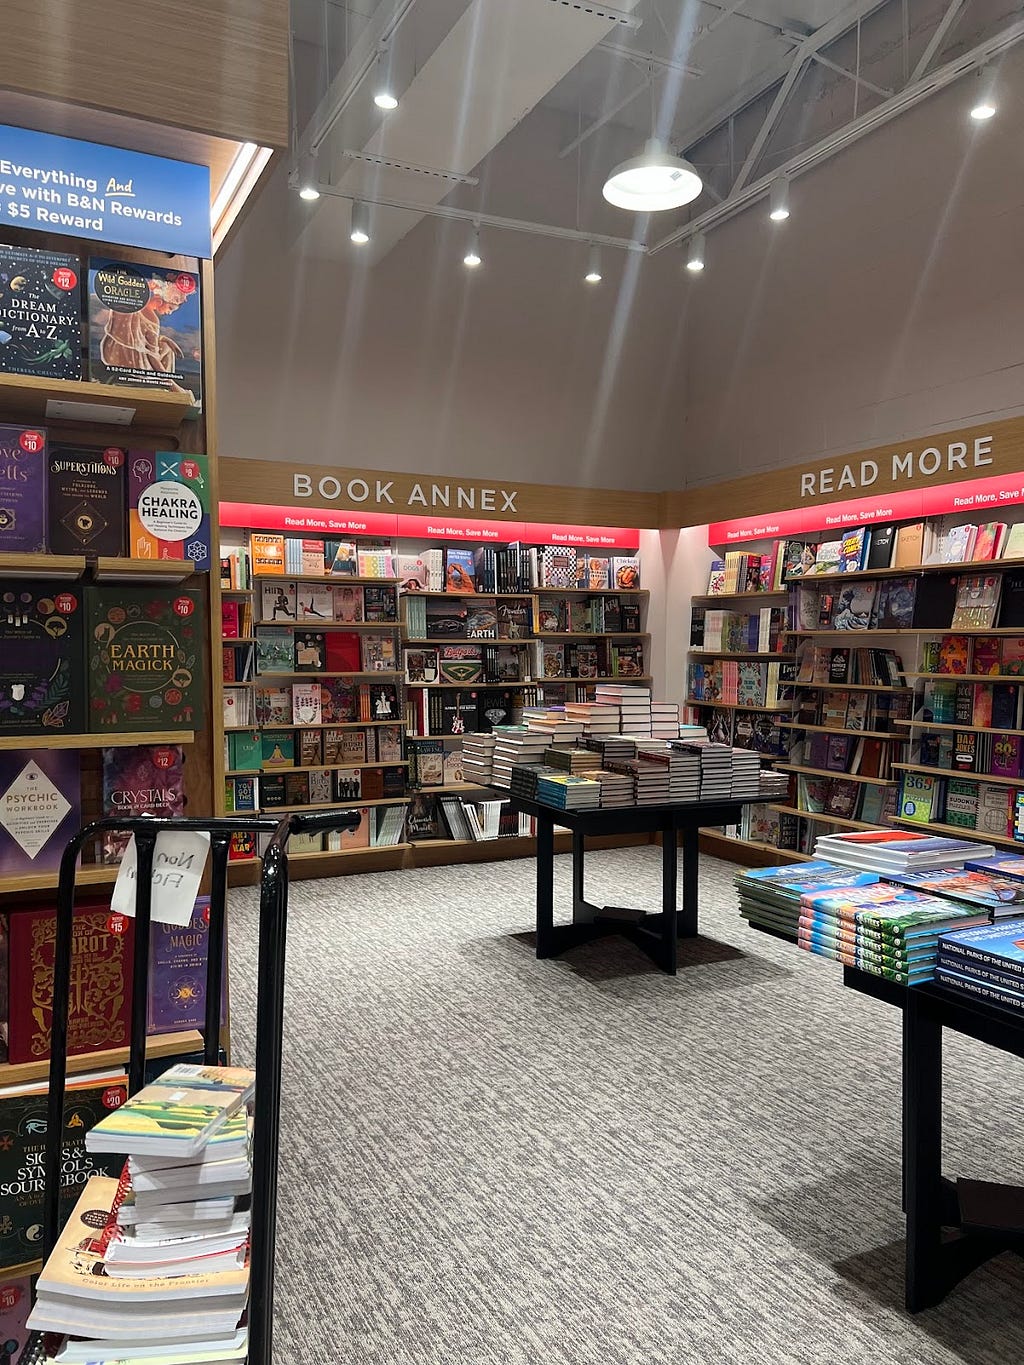 An image of the book annex section of Barnes and Noble.